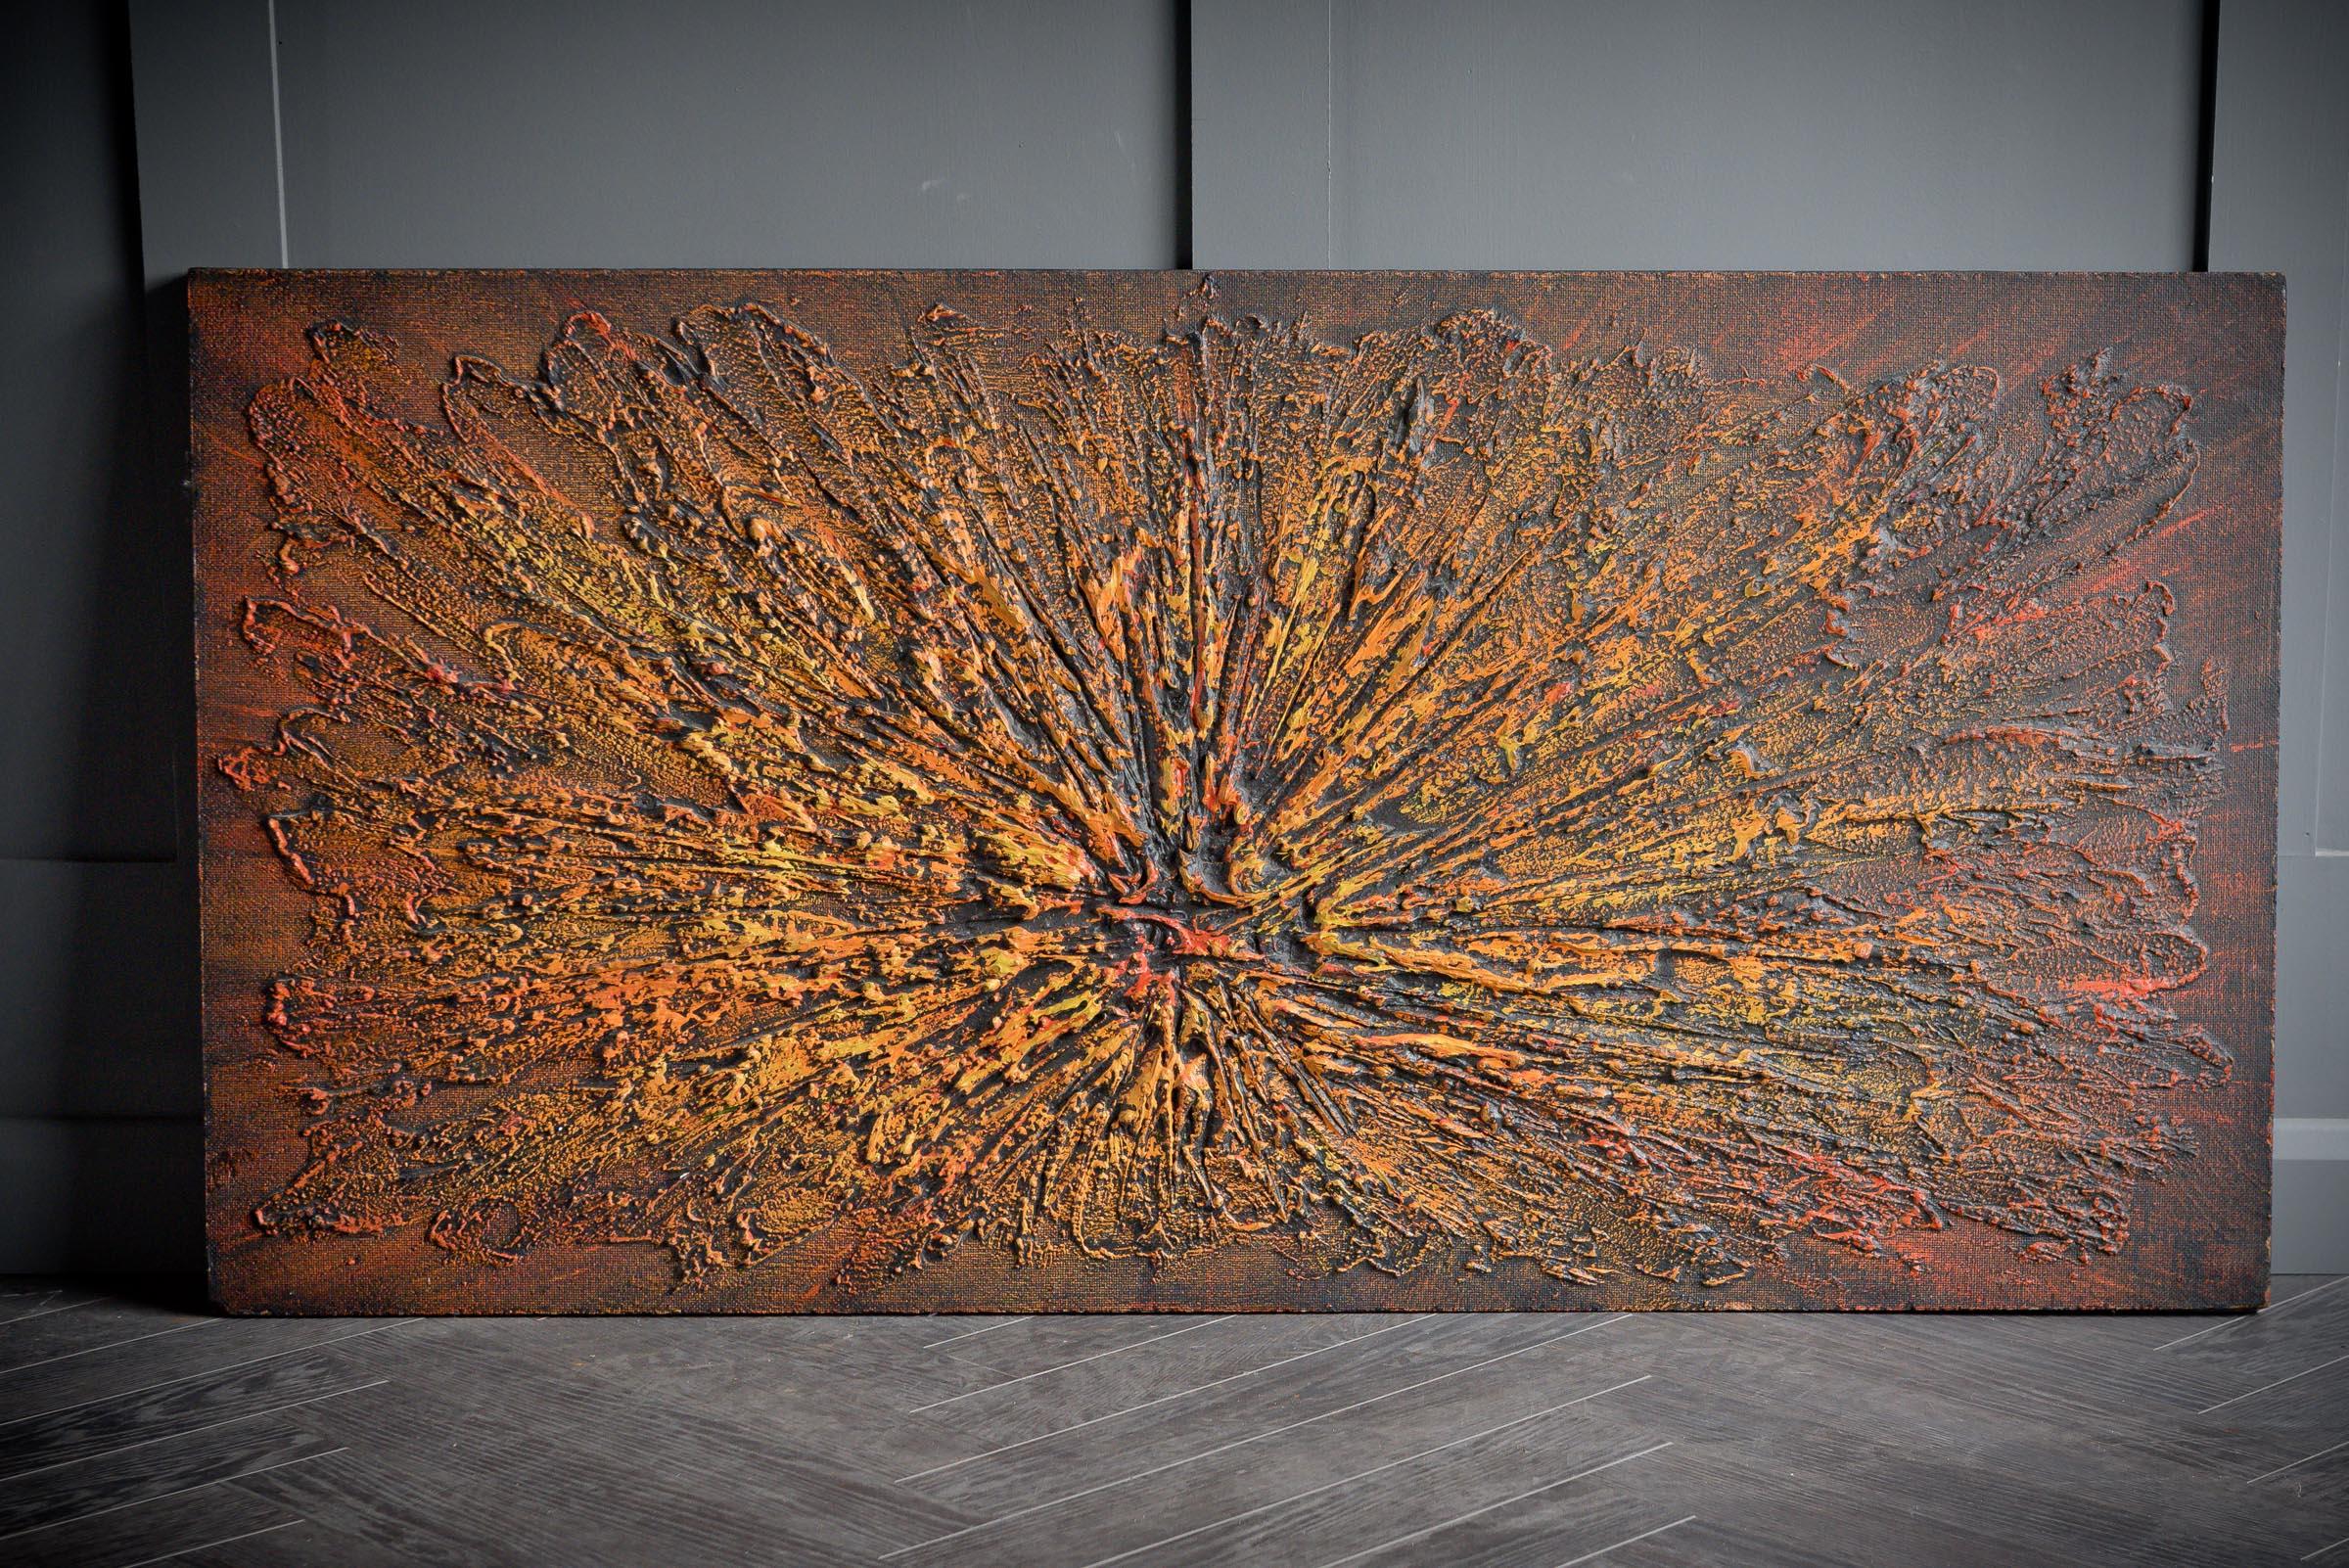 Troica style sunburst painting in acrylic on canvas - Signed on the back by artist and dated 1974.